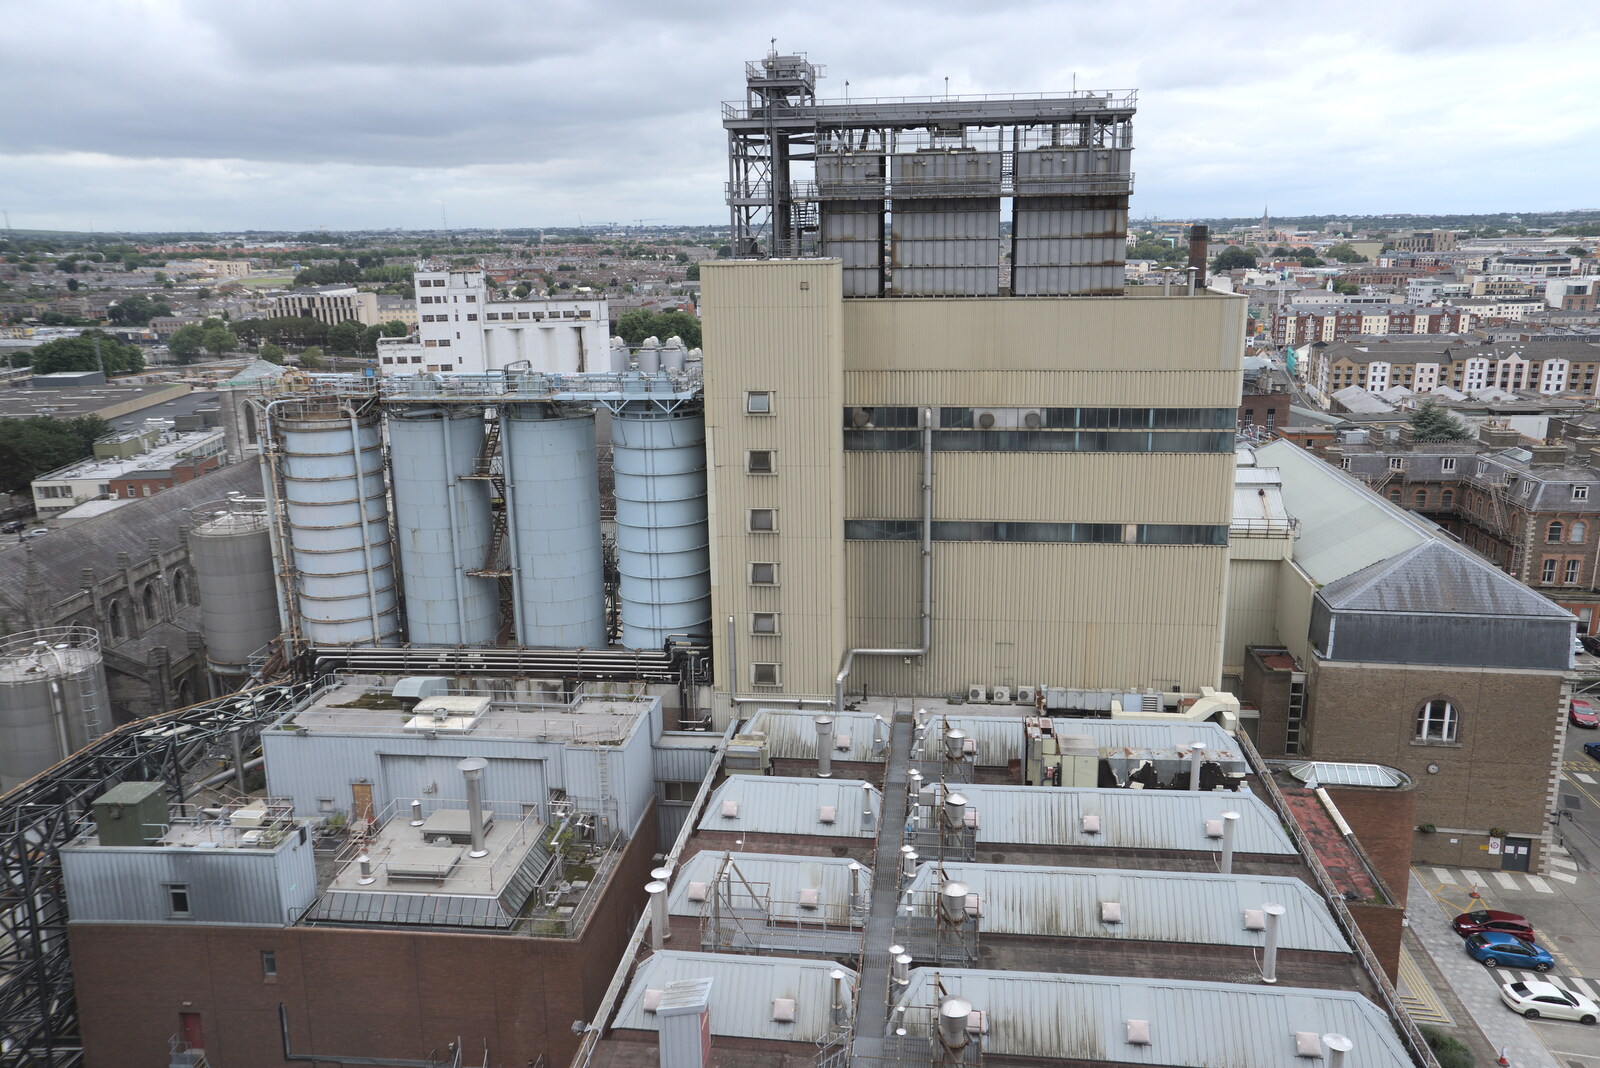 A view over the factory from The Guinness Storehouse Tour, St. James's Gate, Dublin, Ireland - 17th August 2021